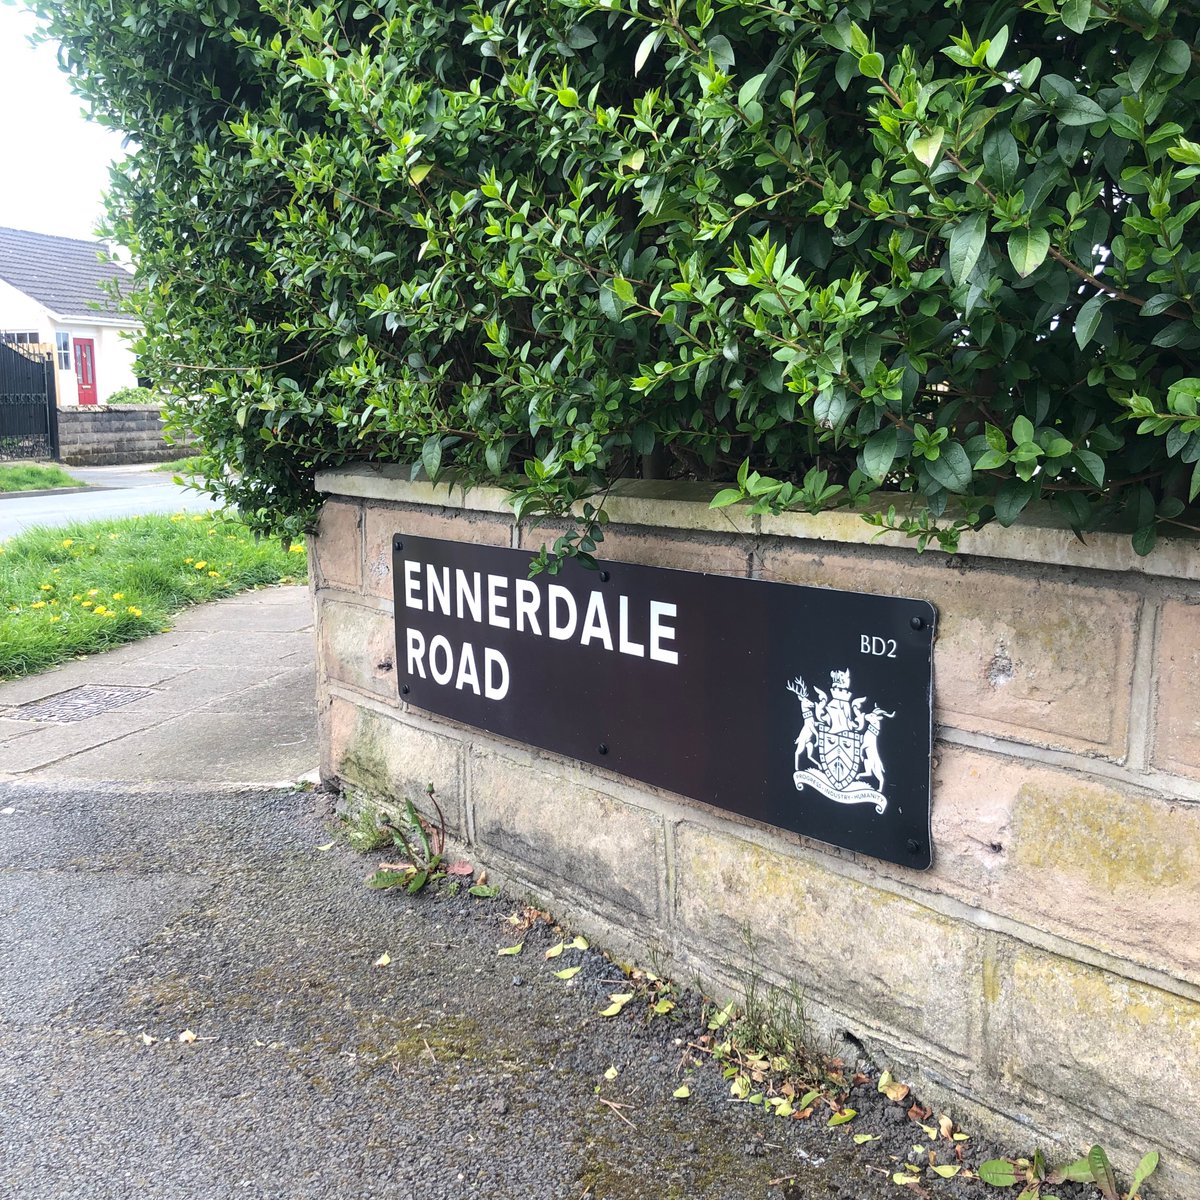 Lots of good conversations and casework in Bolton and Undercliffe today: pension inequality; street lights; playgrounds; fireworks; affordable housing; barking dogs; bus stops; markets; speeding cars… Plus nice to see yet more of our heritage-style street signs rolled out!